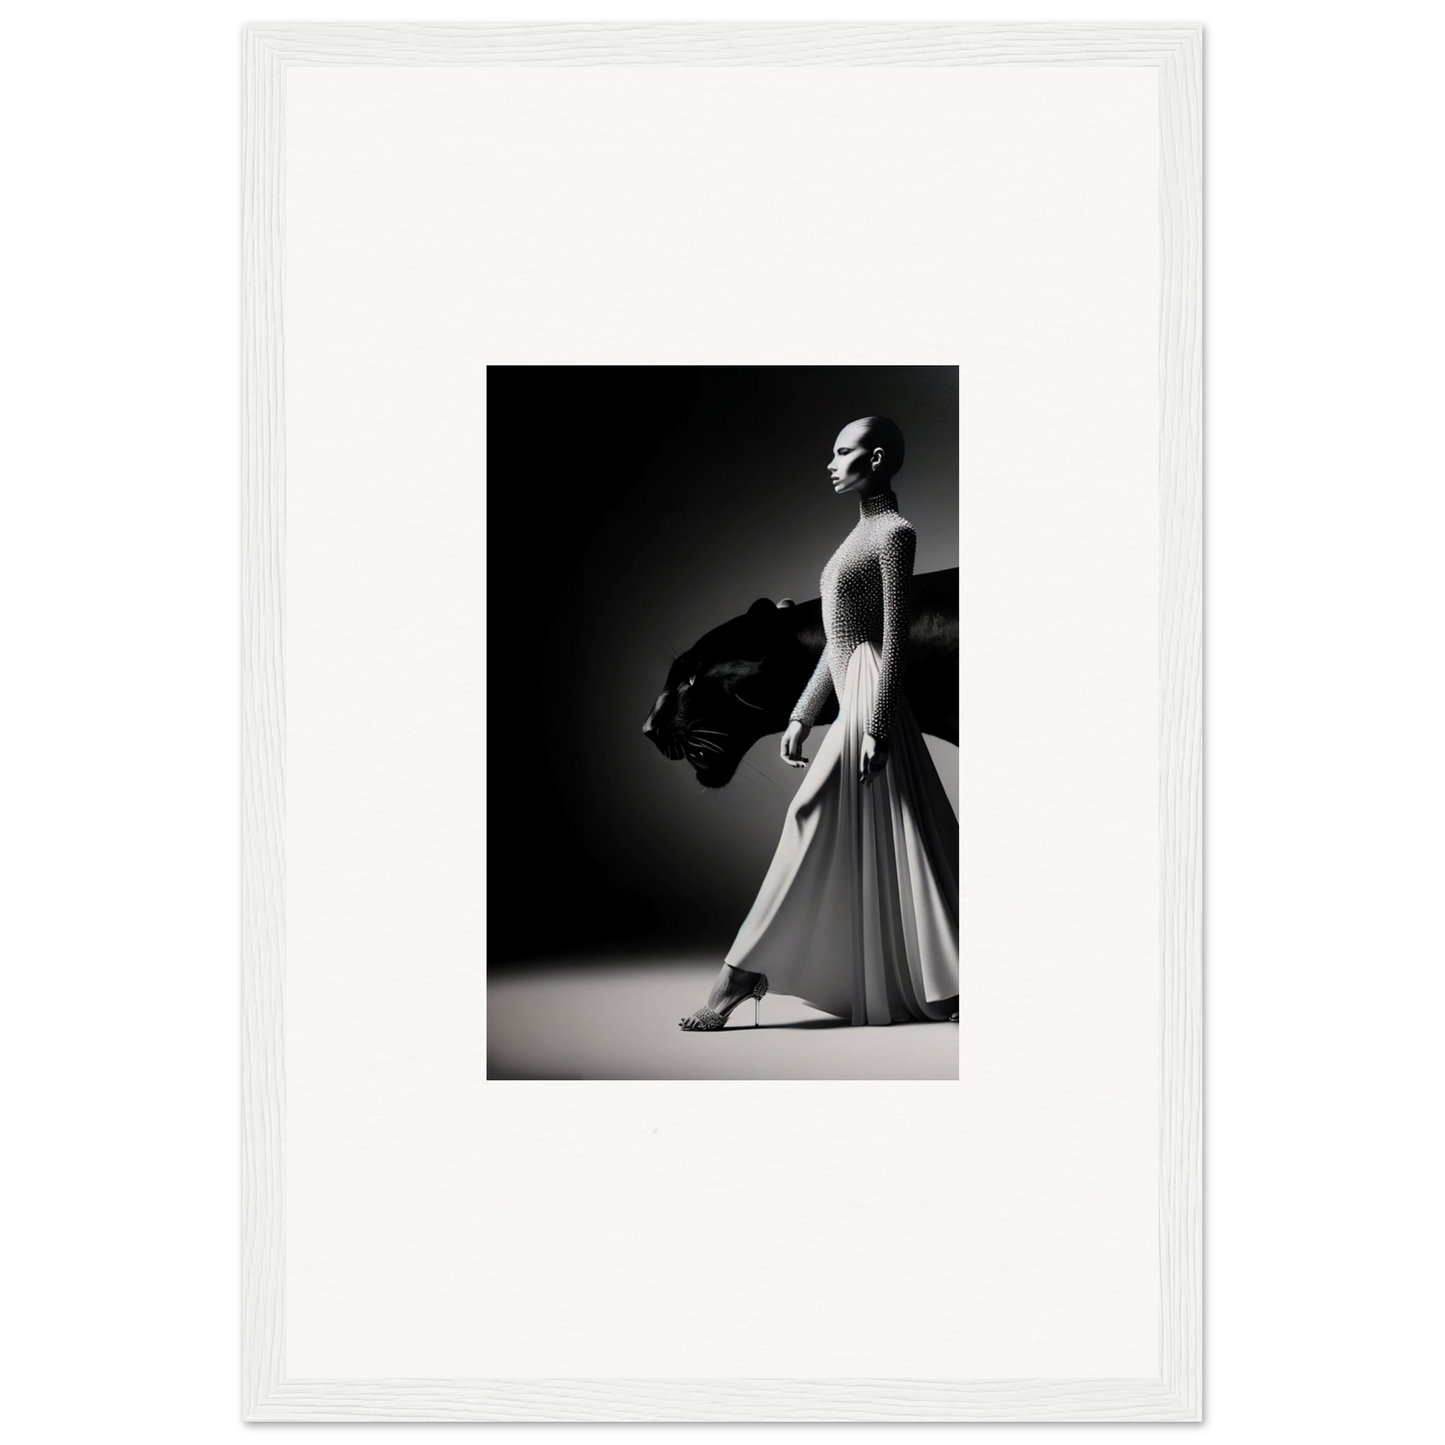 Dancers and time a3 - framed poster - 30x45 cm / 12x18″ /